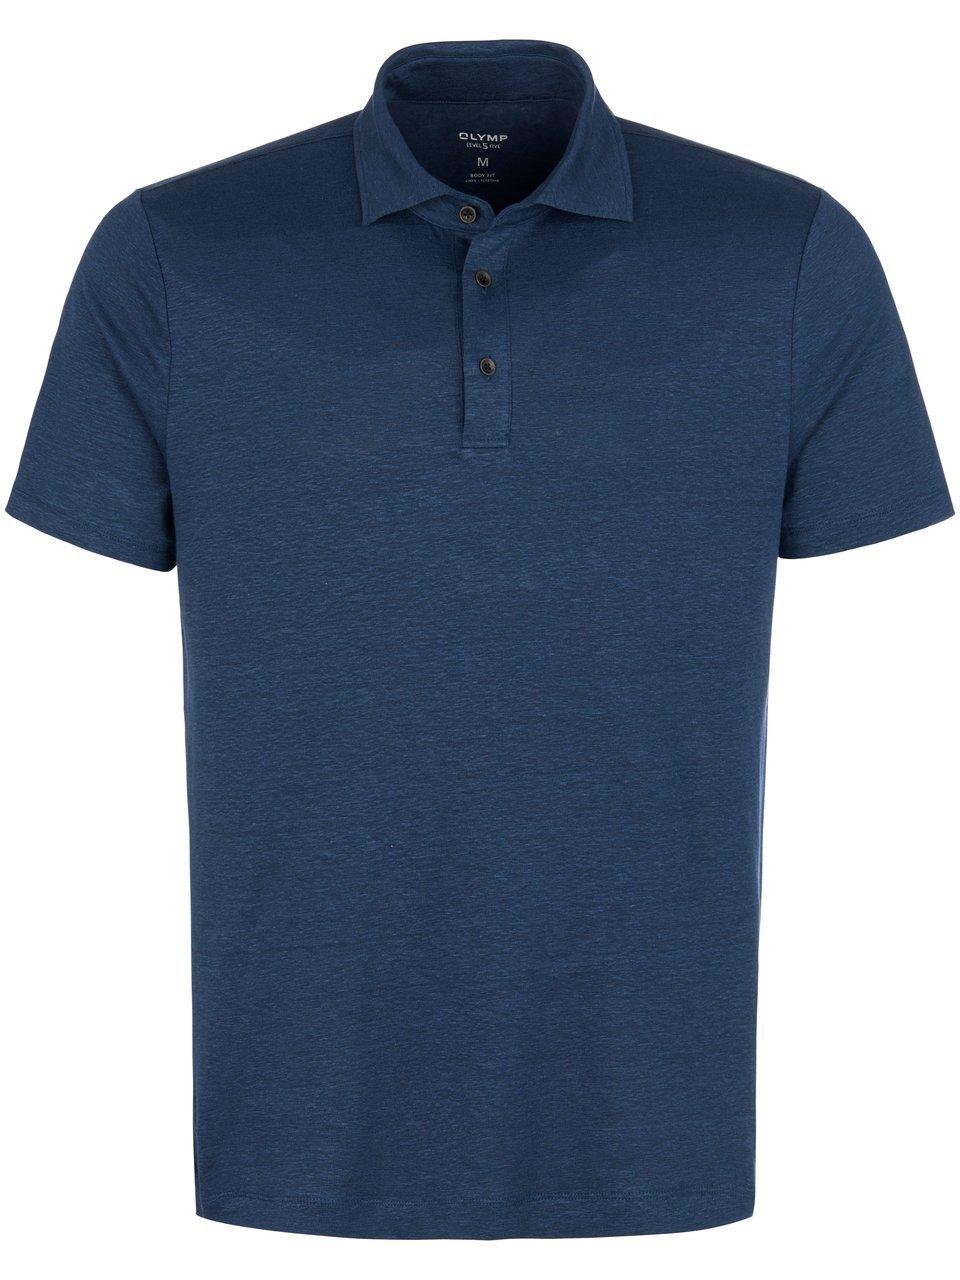 OLYMP Polo Level 5 Casual - slim fit polo - rookblauw - Maat: M